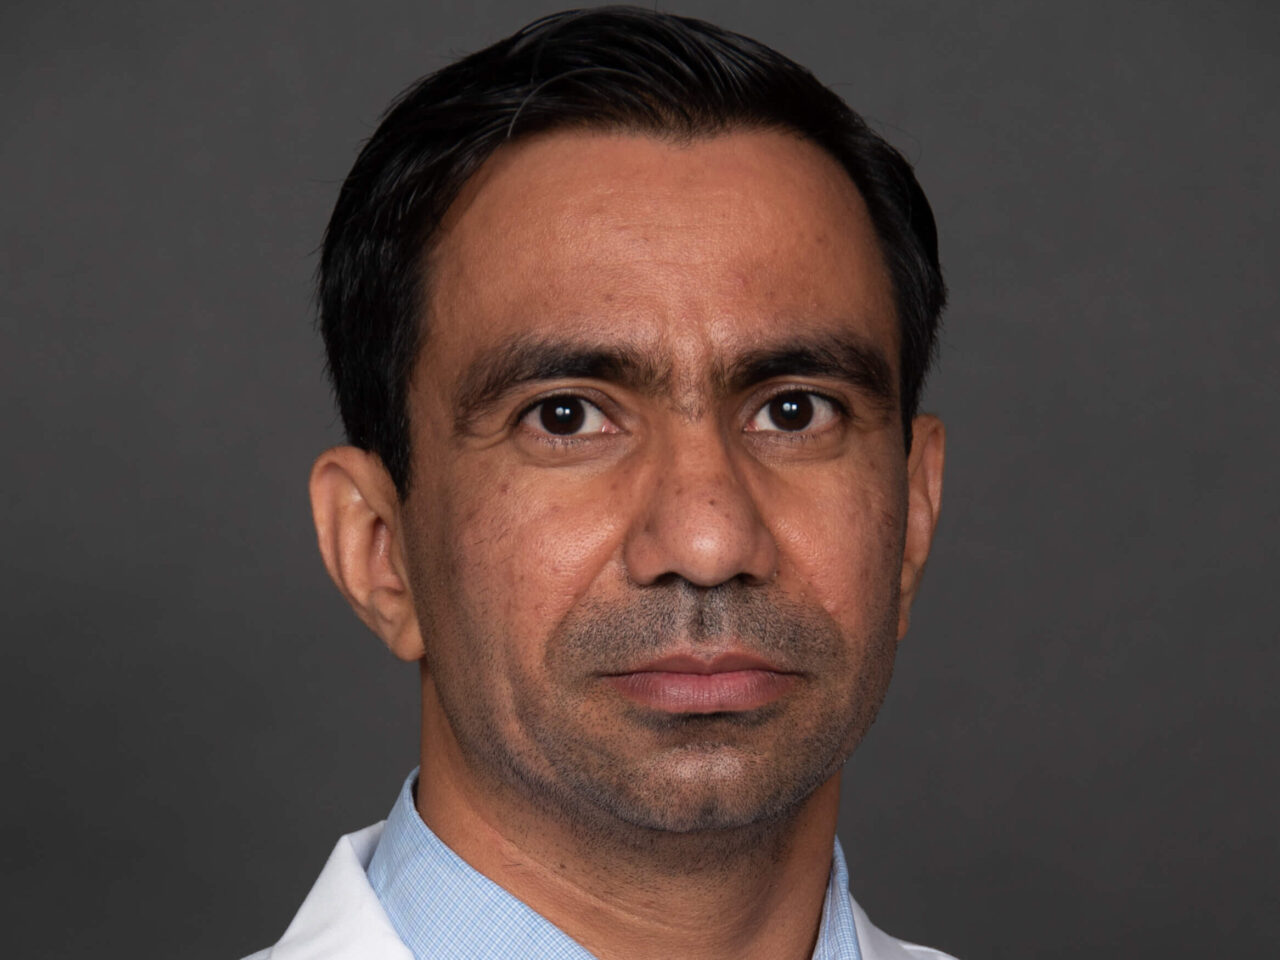 Vijendra Singh: Why I’m skeptical about Imetelstat’s use for MDS treatment